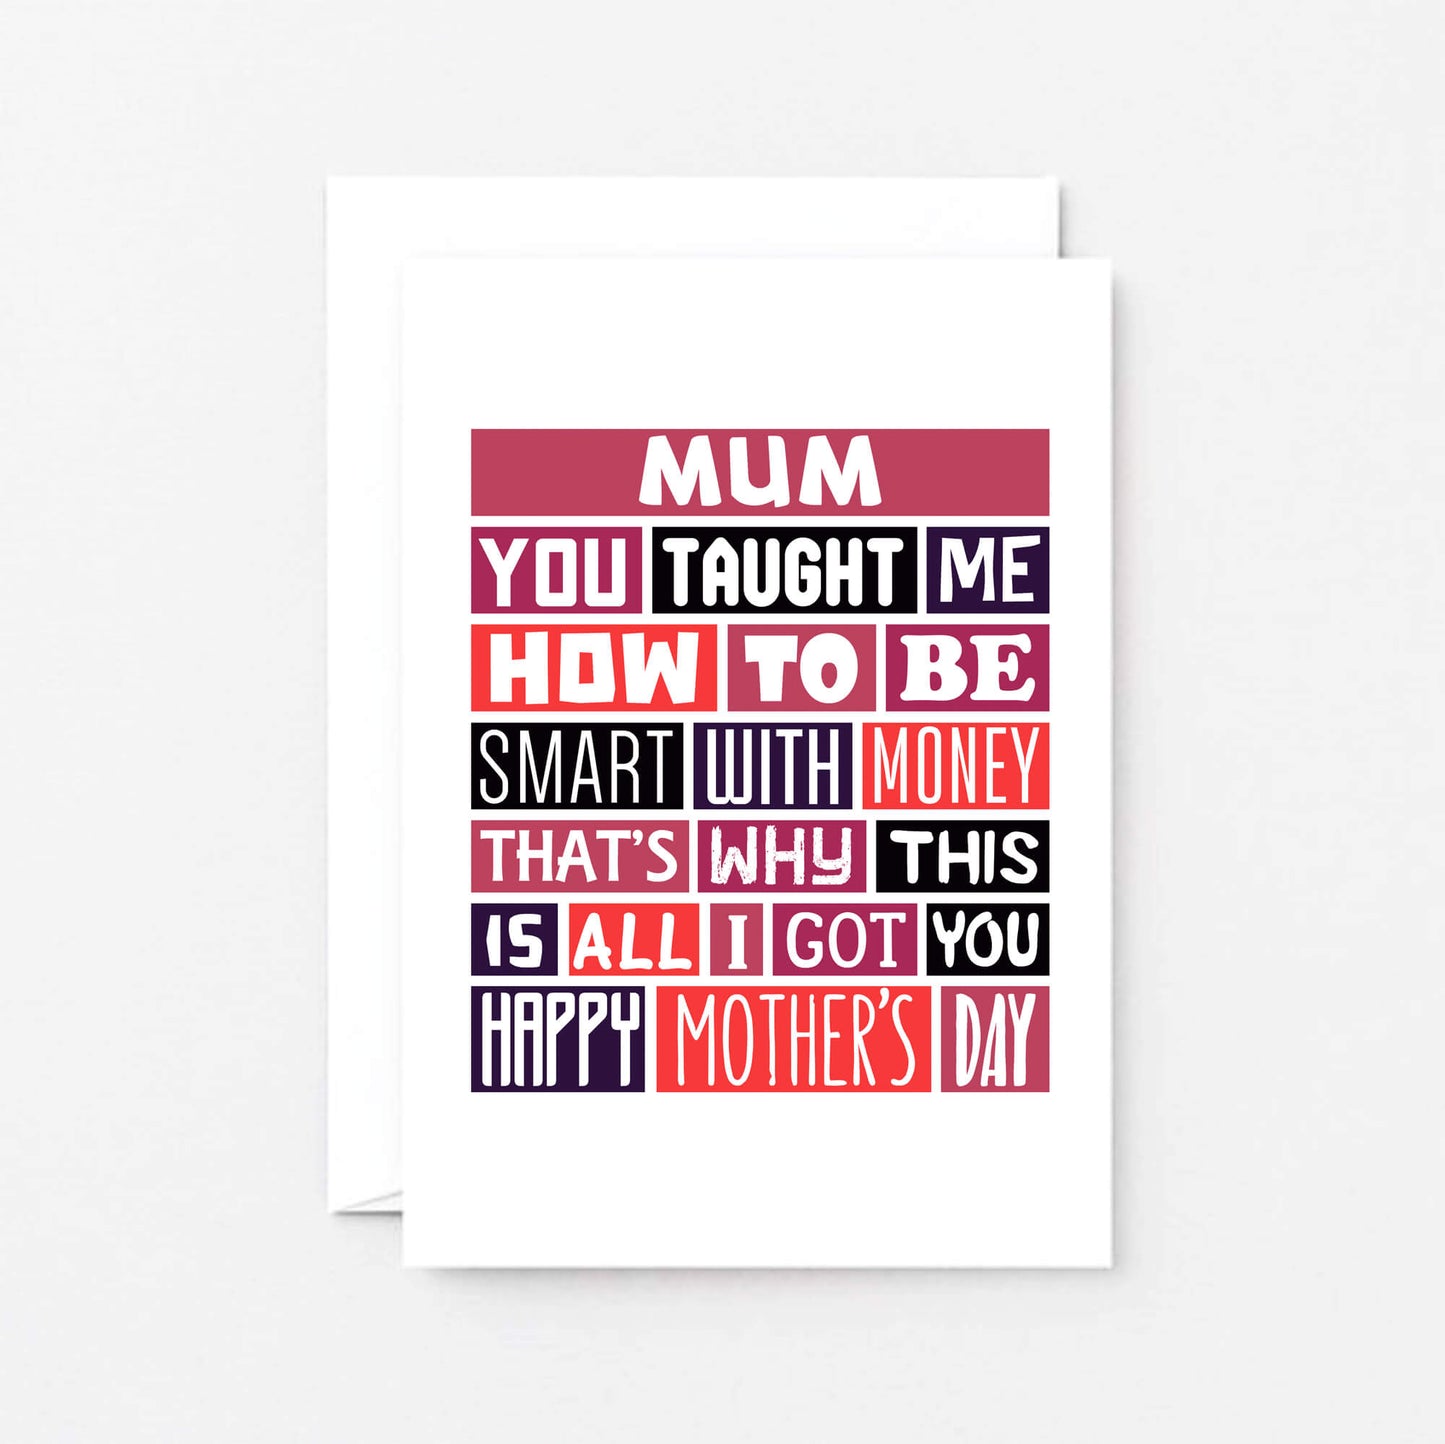 Mother's Day Card by SixElevenCreations. Reads Mum You taught me how to be smart with money That's why this is all I got you. Happy Mother's Day. Product Code SEM0005A6